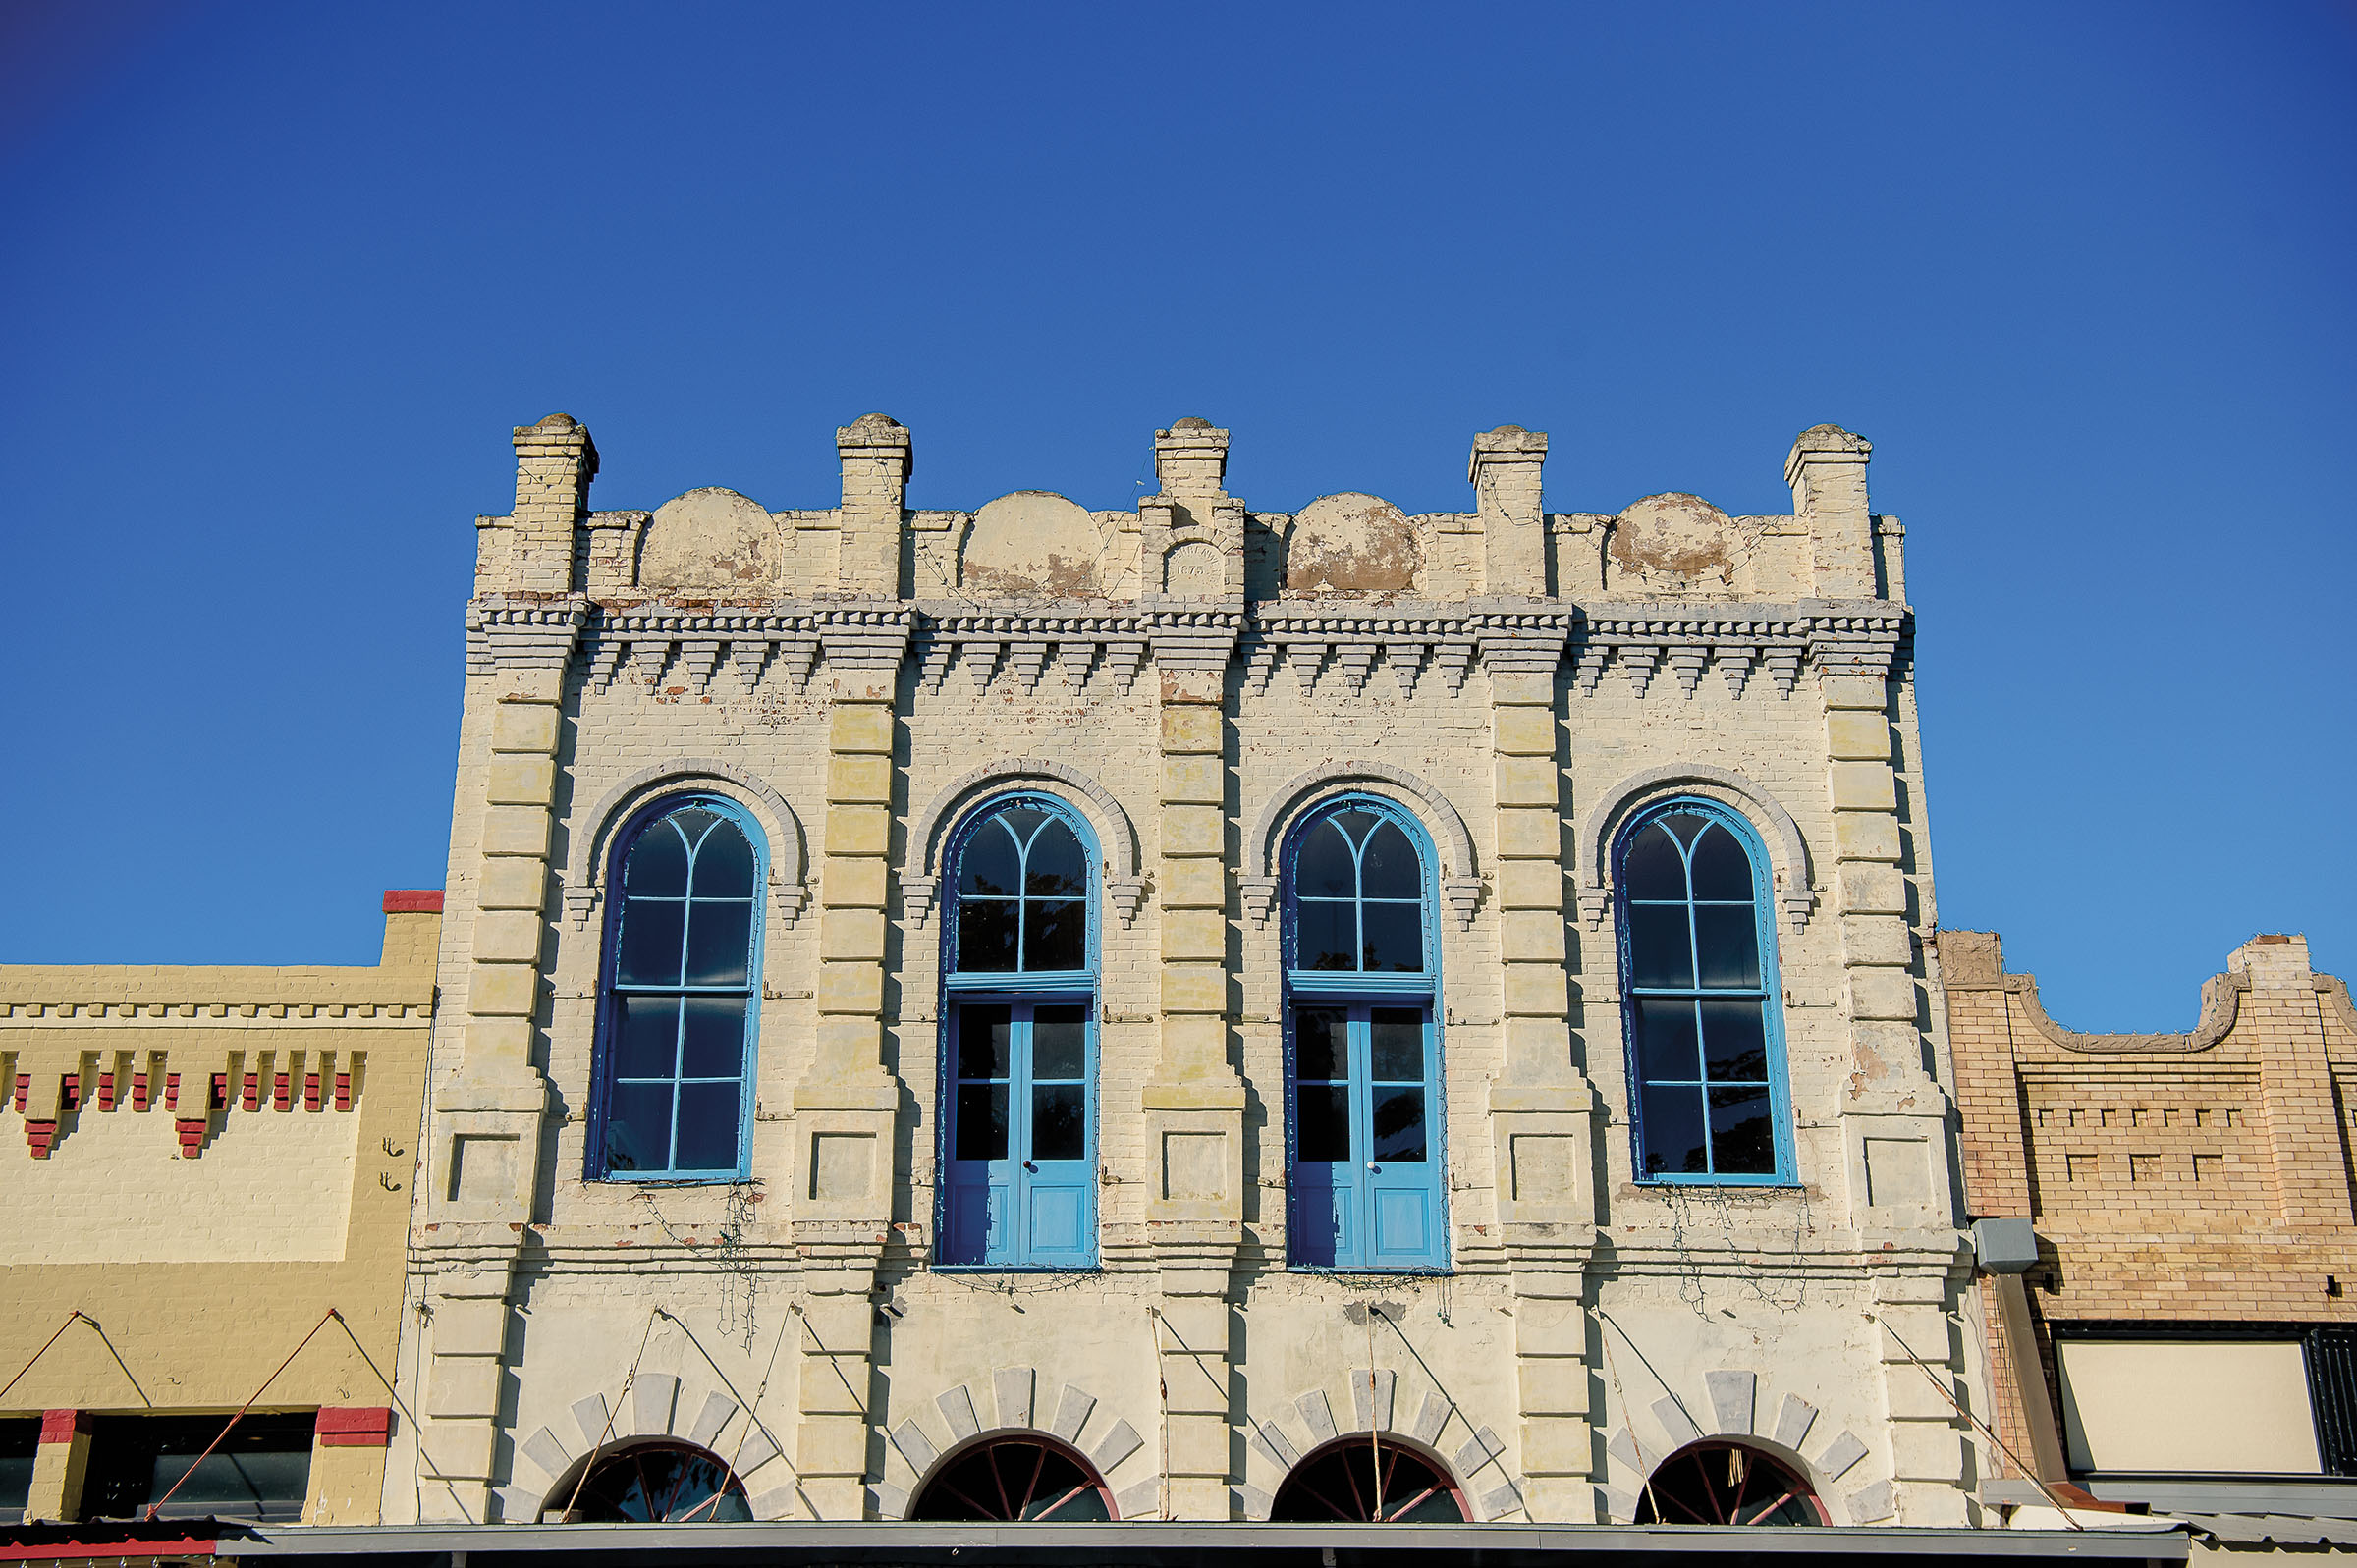 The exterior of a tan sone building with turquioise arches under blue sky